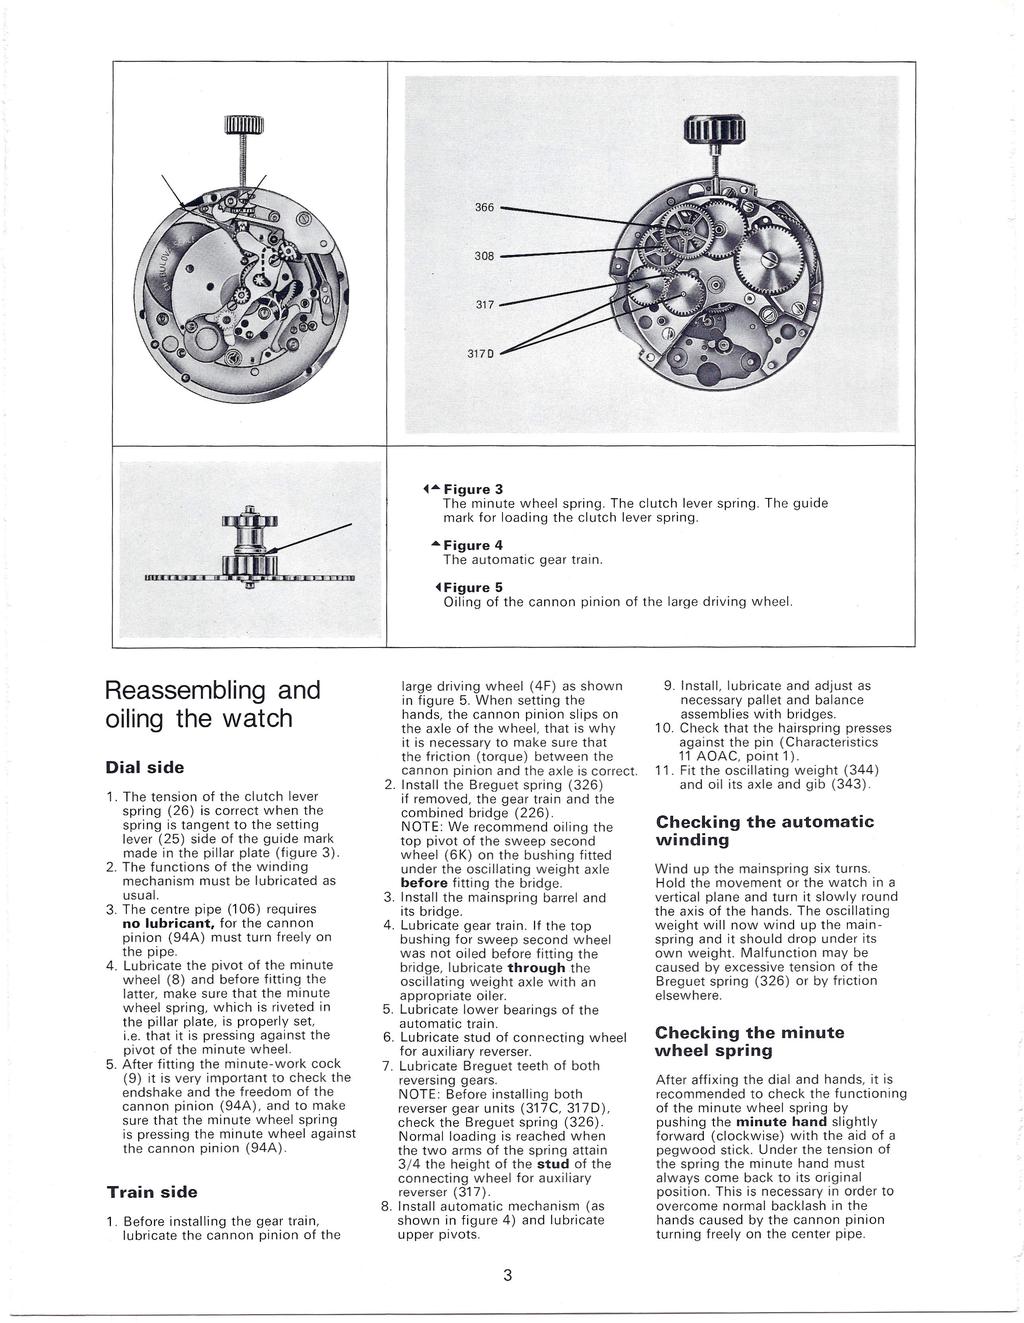 .:» 366 30B------r 317 317D ~.. Figure 3 The minute wheel spring. The clutch lever spring. The guide mark for loading the clutch lever spring. "'Figure 4 The automatic gear train.